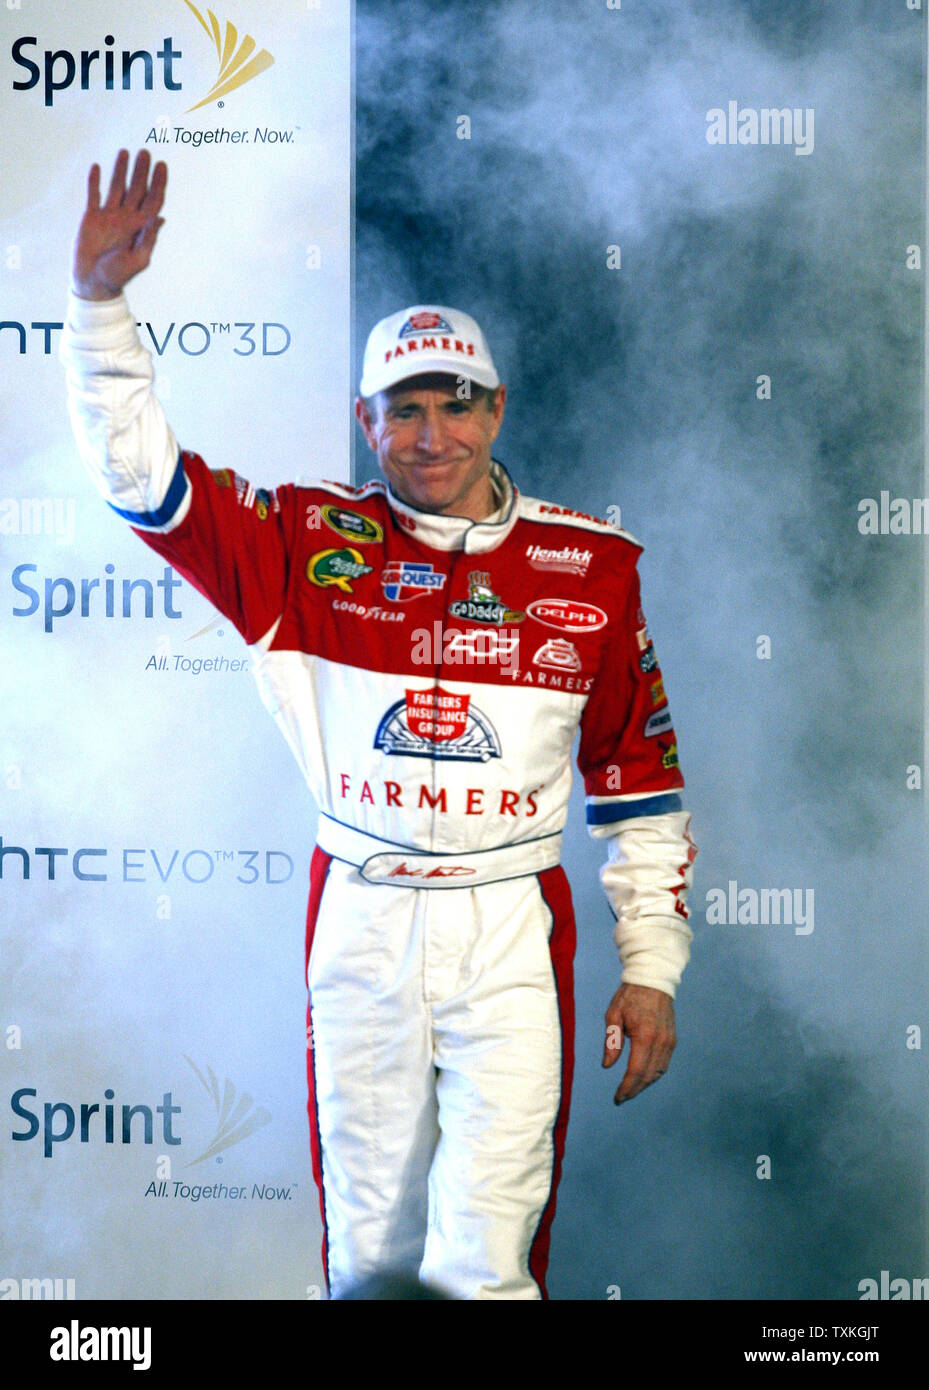 Mark Martin waves to fans during driver introductions before the NASCAR Sprint Cup Series All-Star Race at the Charlotte Motor Speedway in Concord, North Carolina on May 21, 2010.   UPI/Nell Redmond . Stock Photo